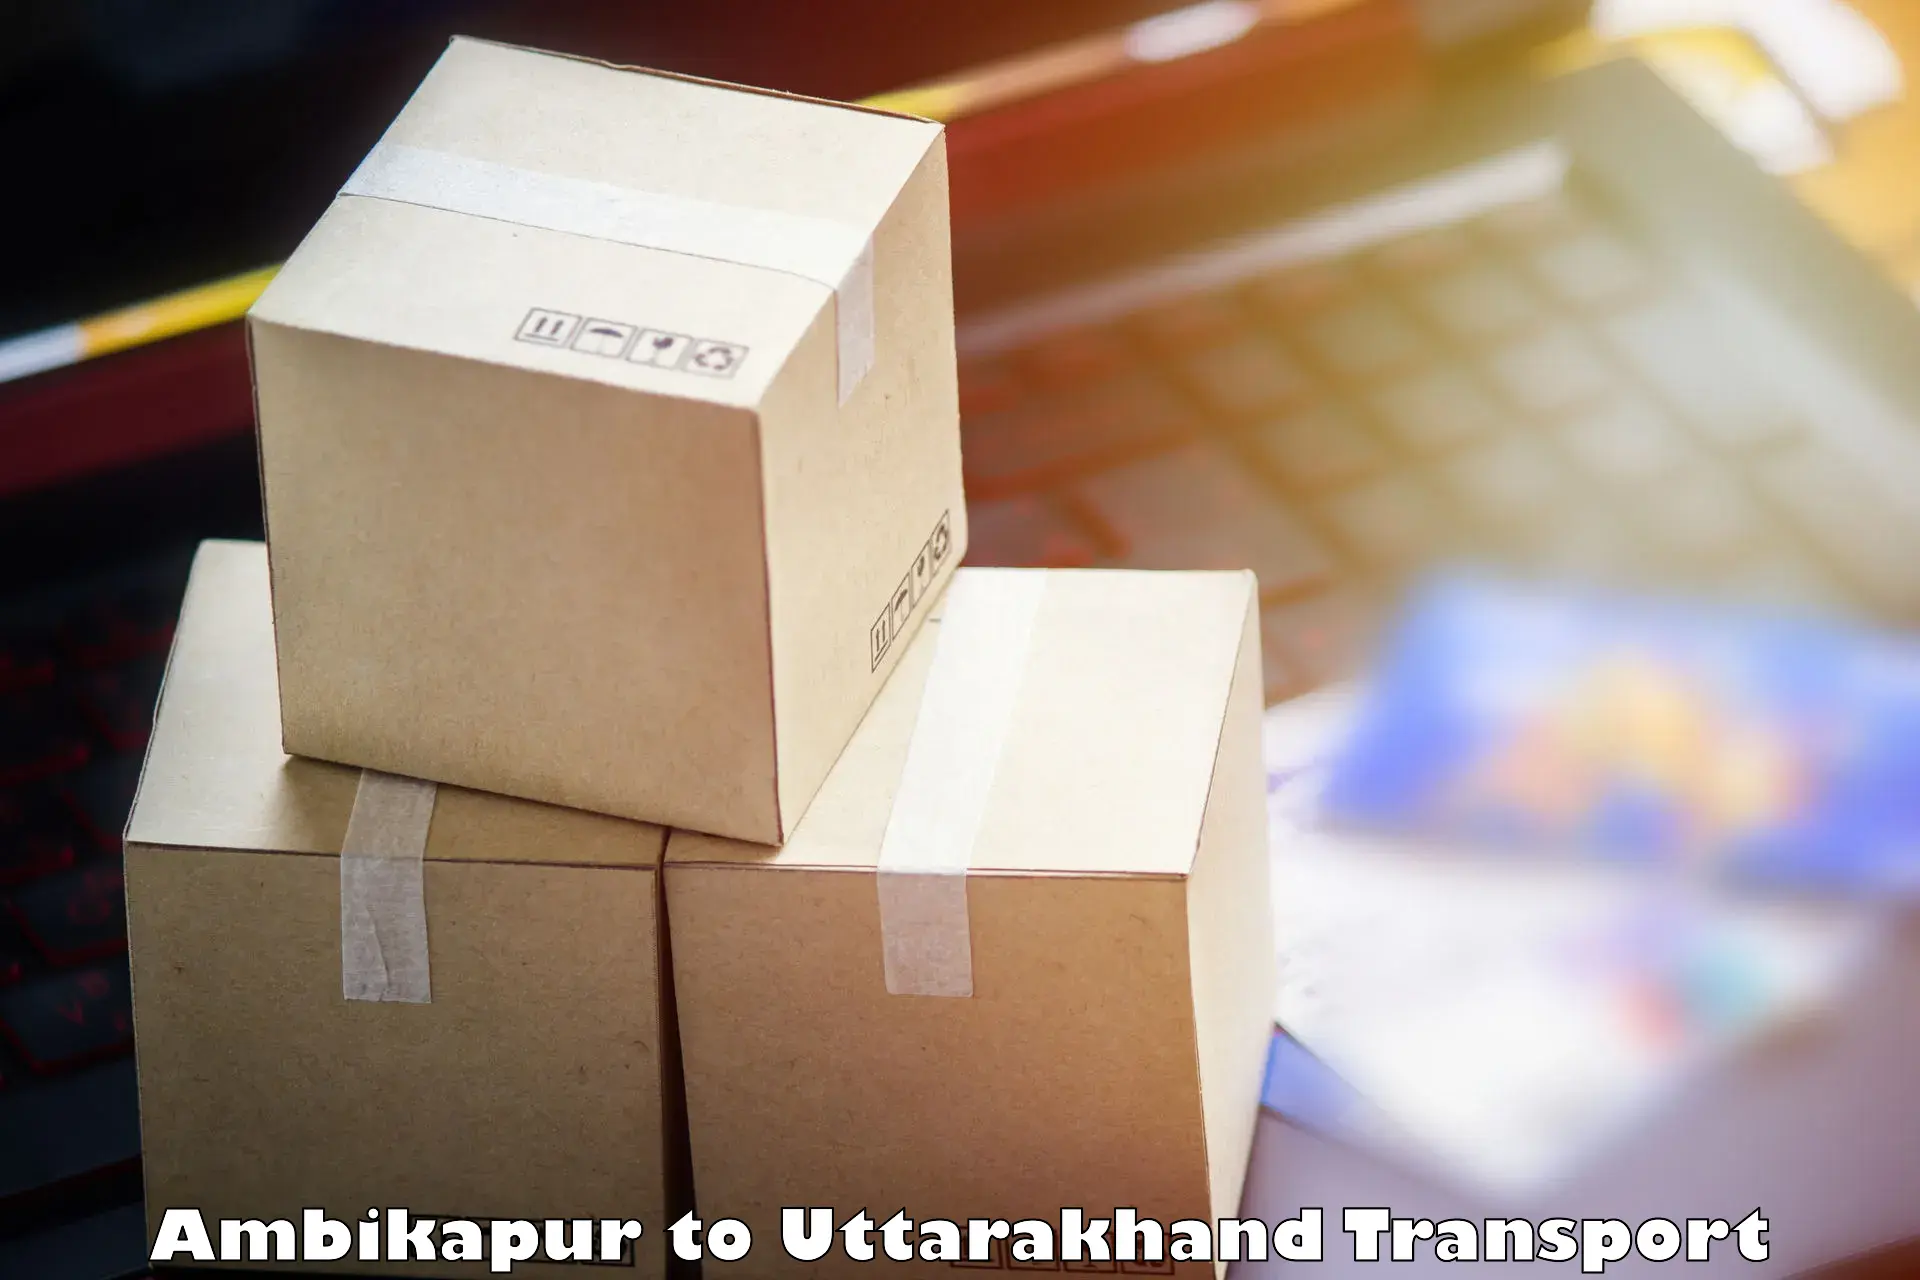 Goods delivery service Ambikapur to IIT Roorkee